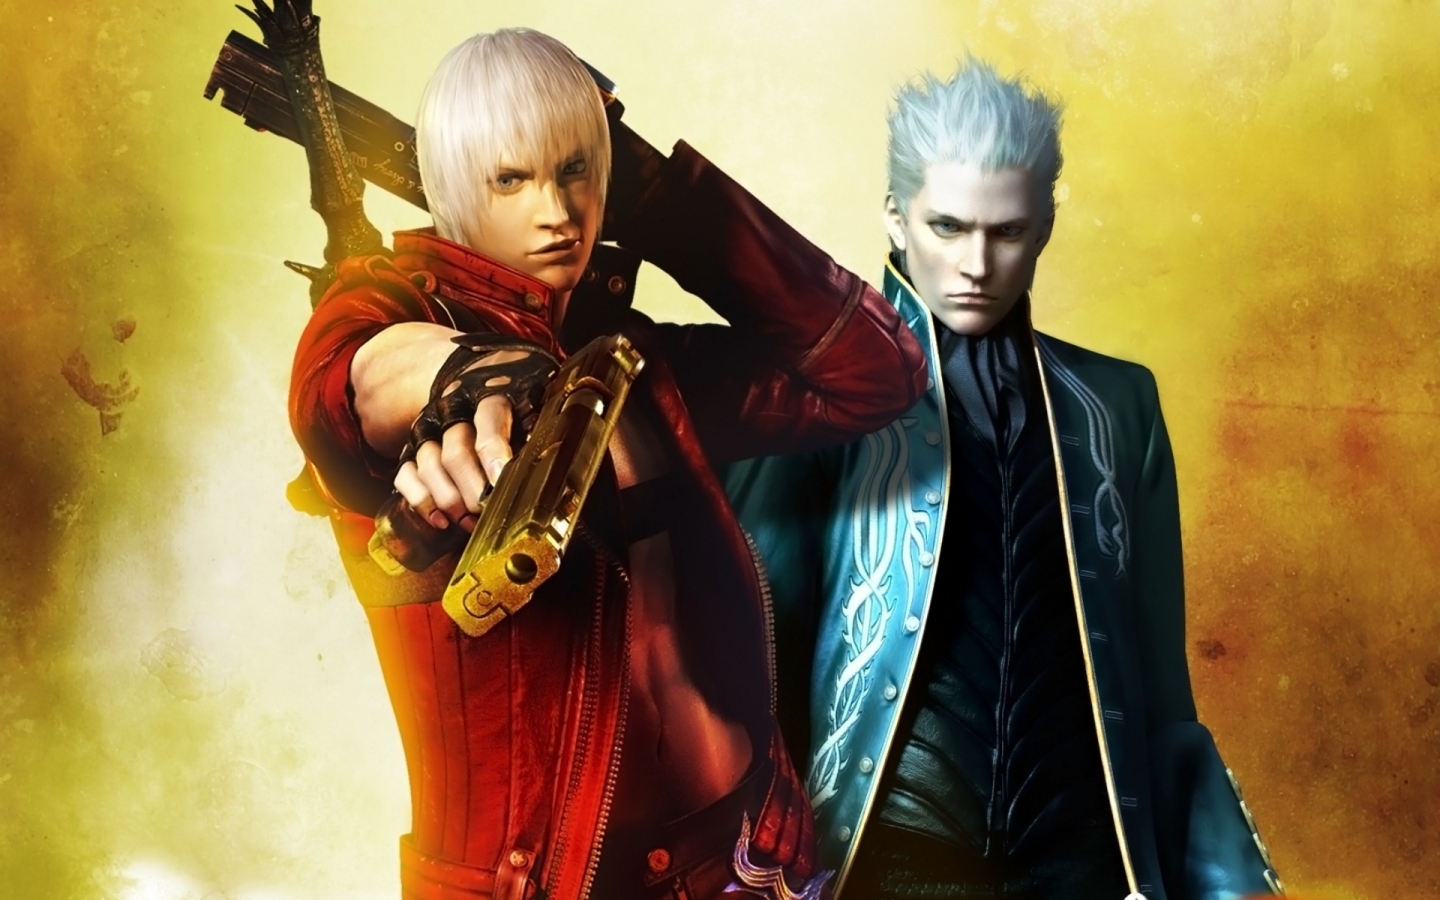 Devil may cry 3 for 1440 x 900 widescreen resolution